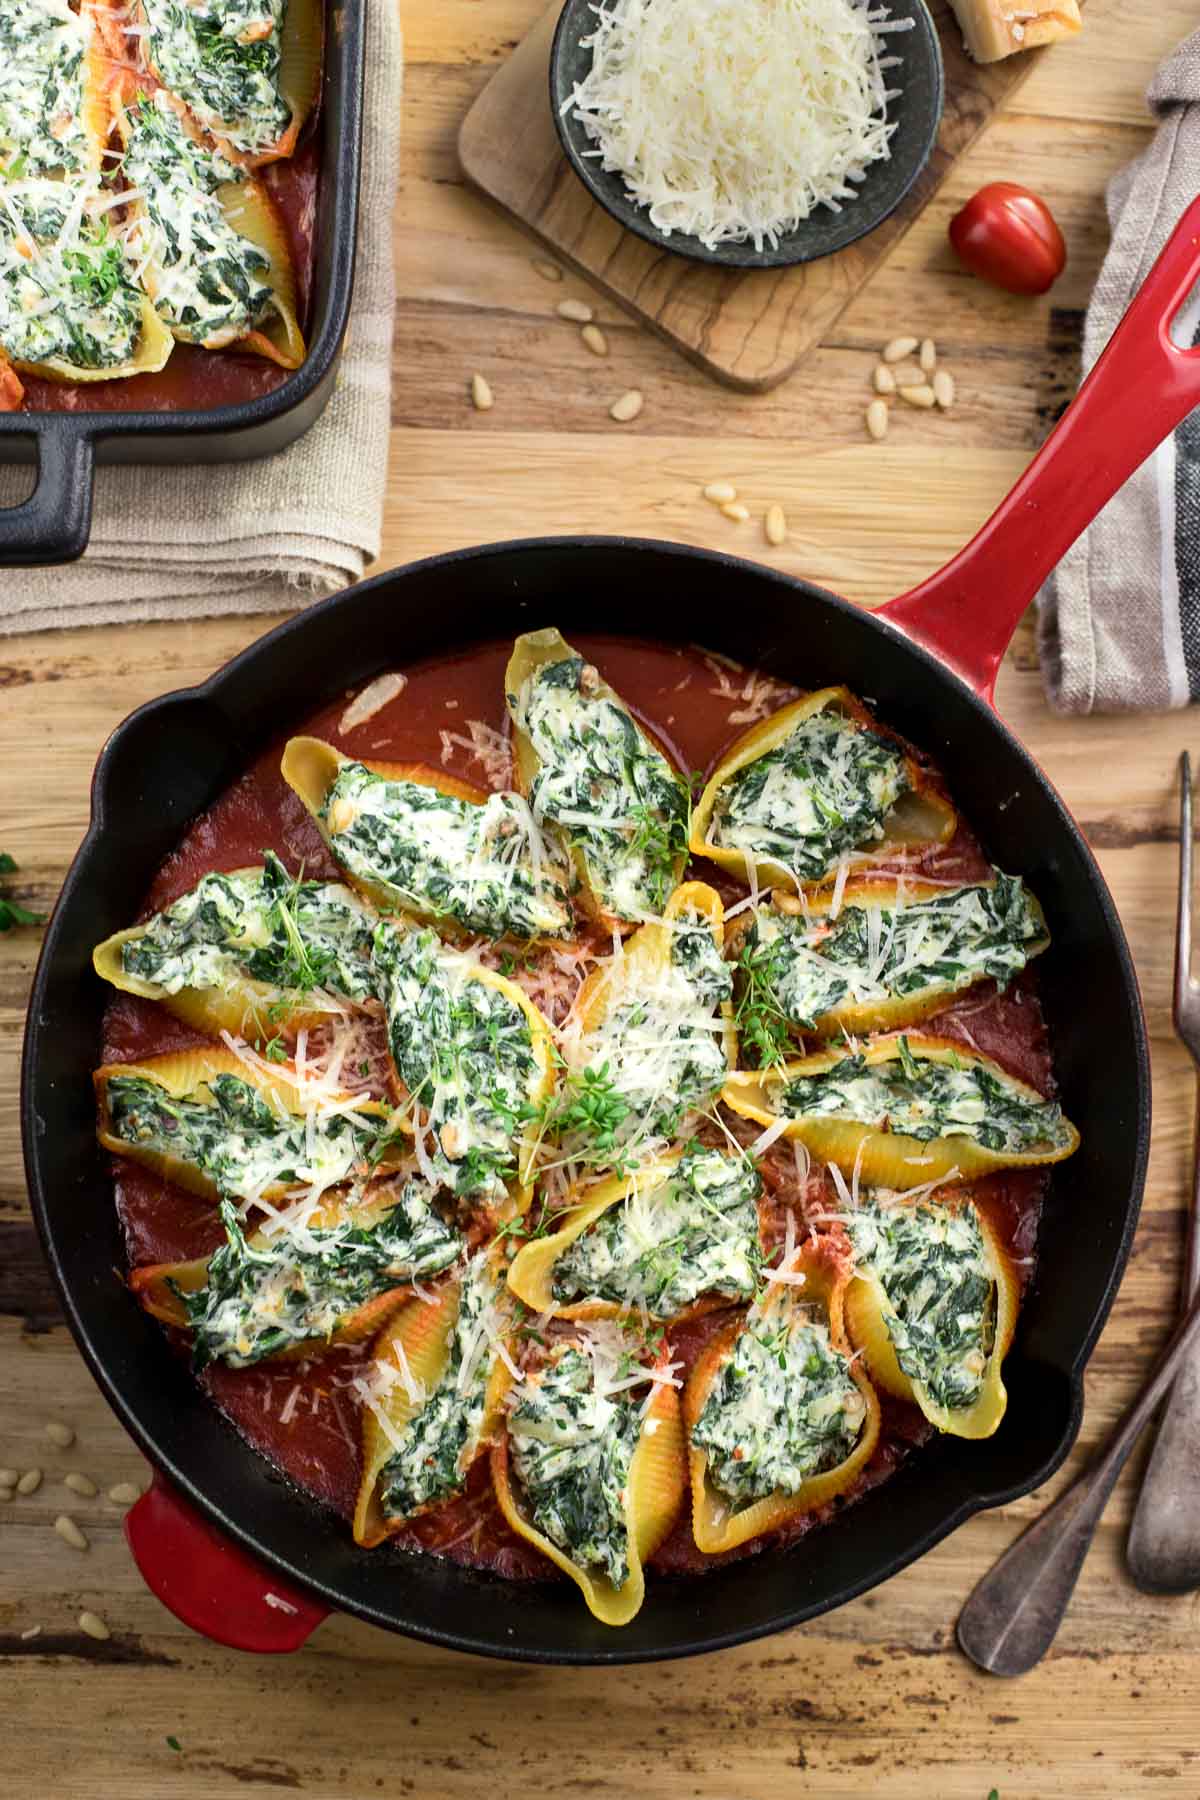 Skillet baked Spinach and Ricotta Stuffed Shells